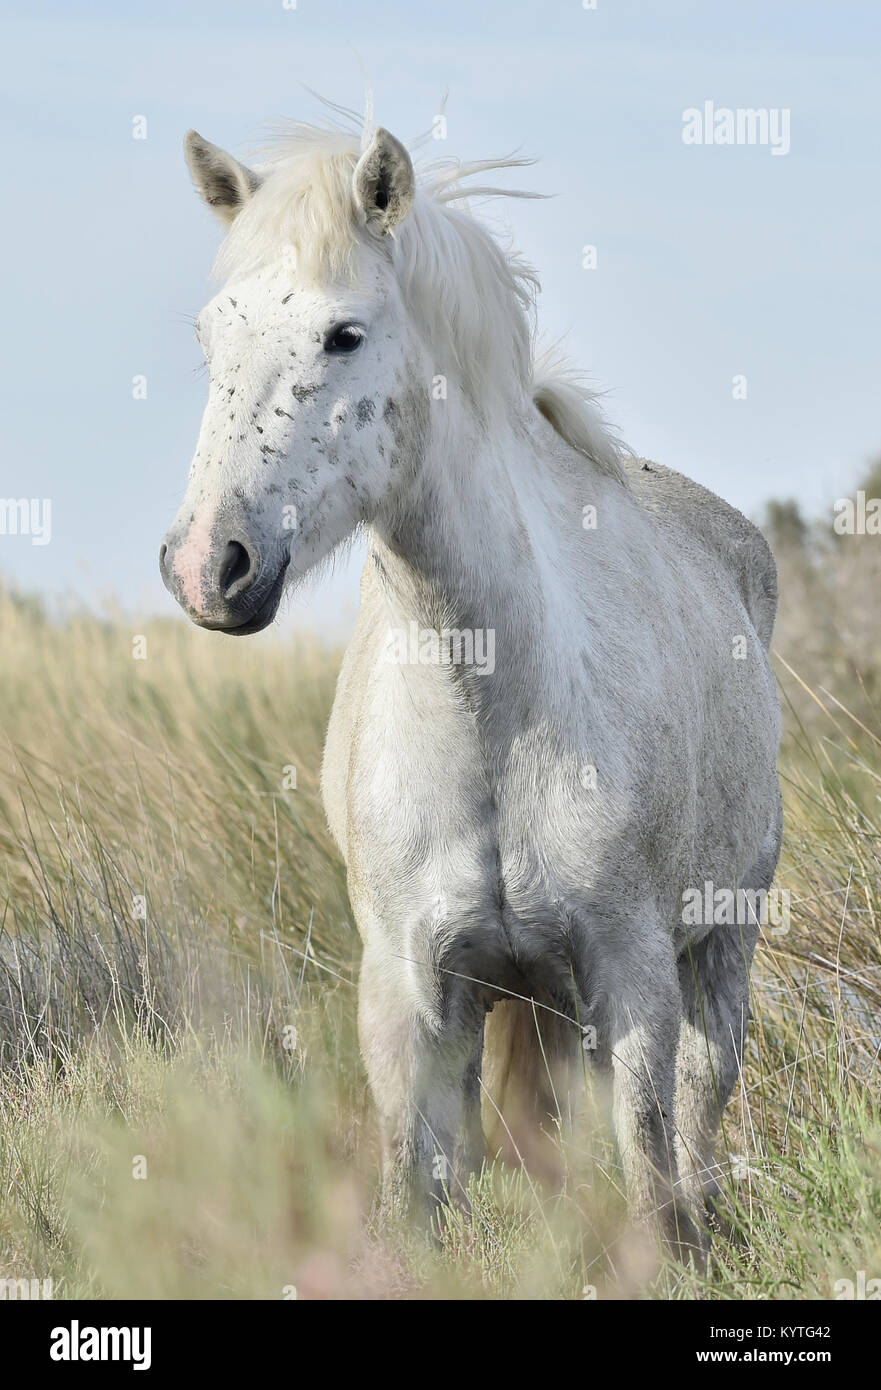 Portrait of the White Camargue Horse. Provance, France Stock Photo